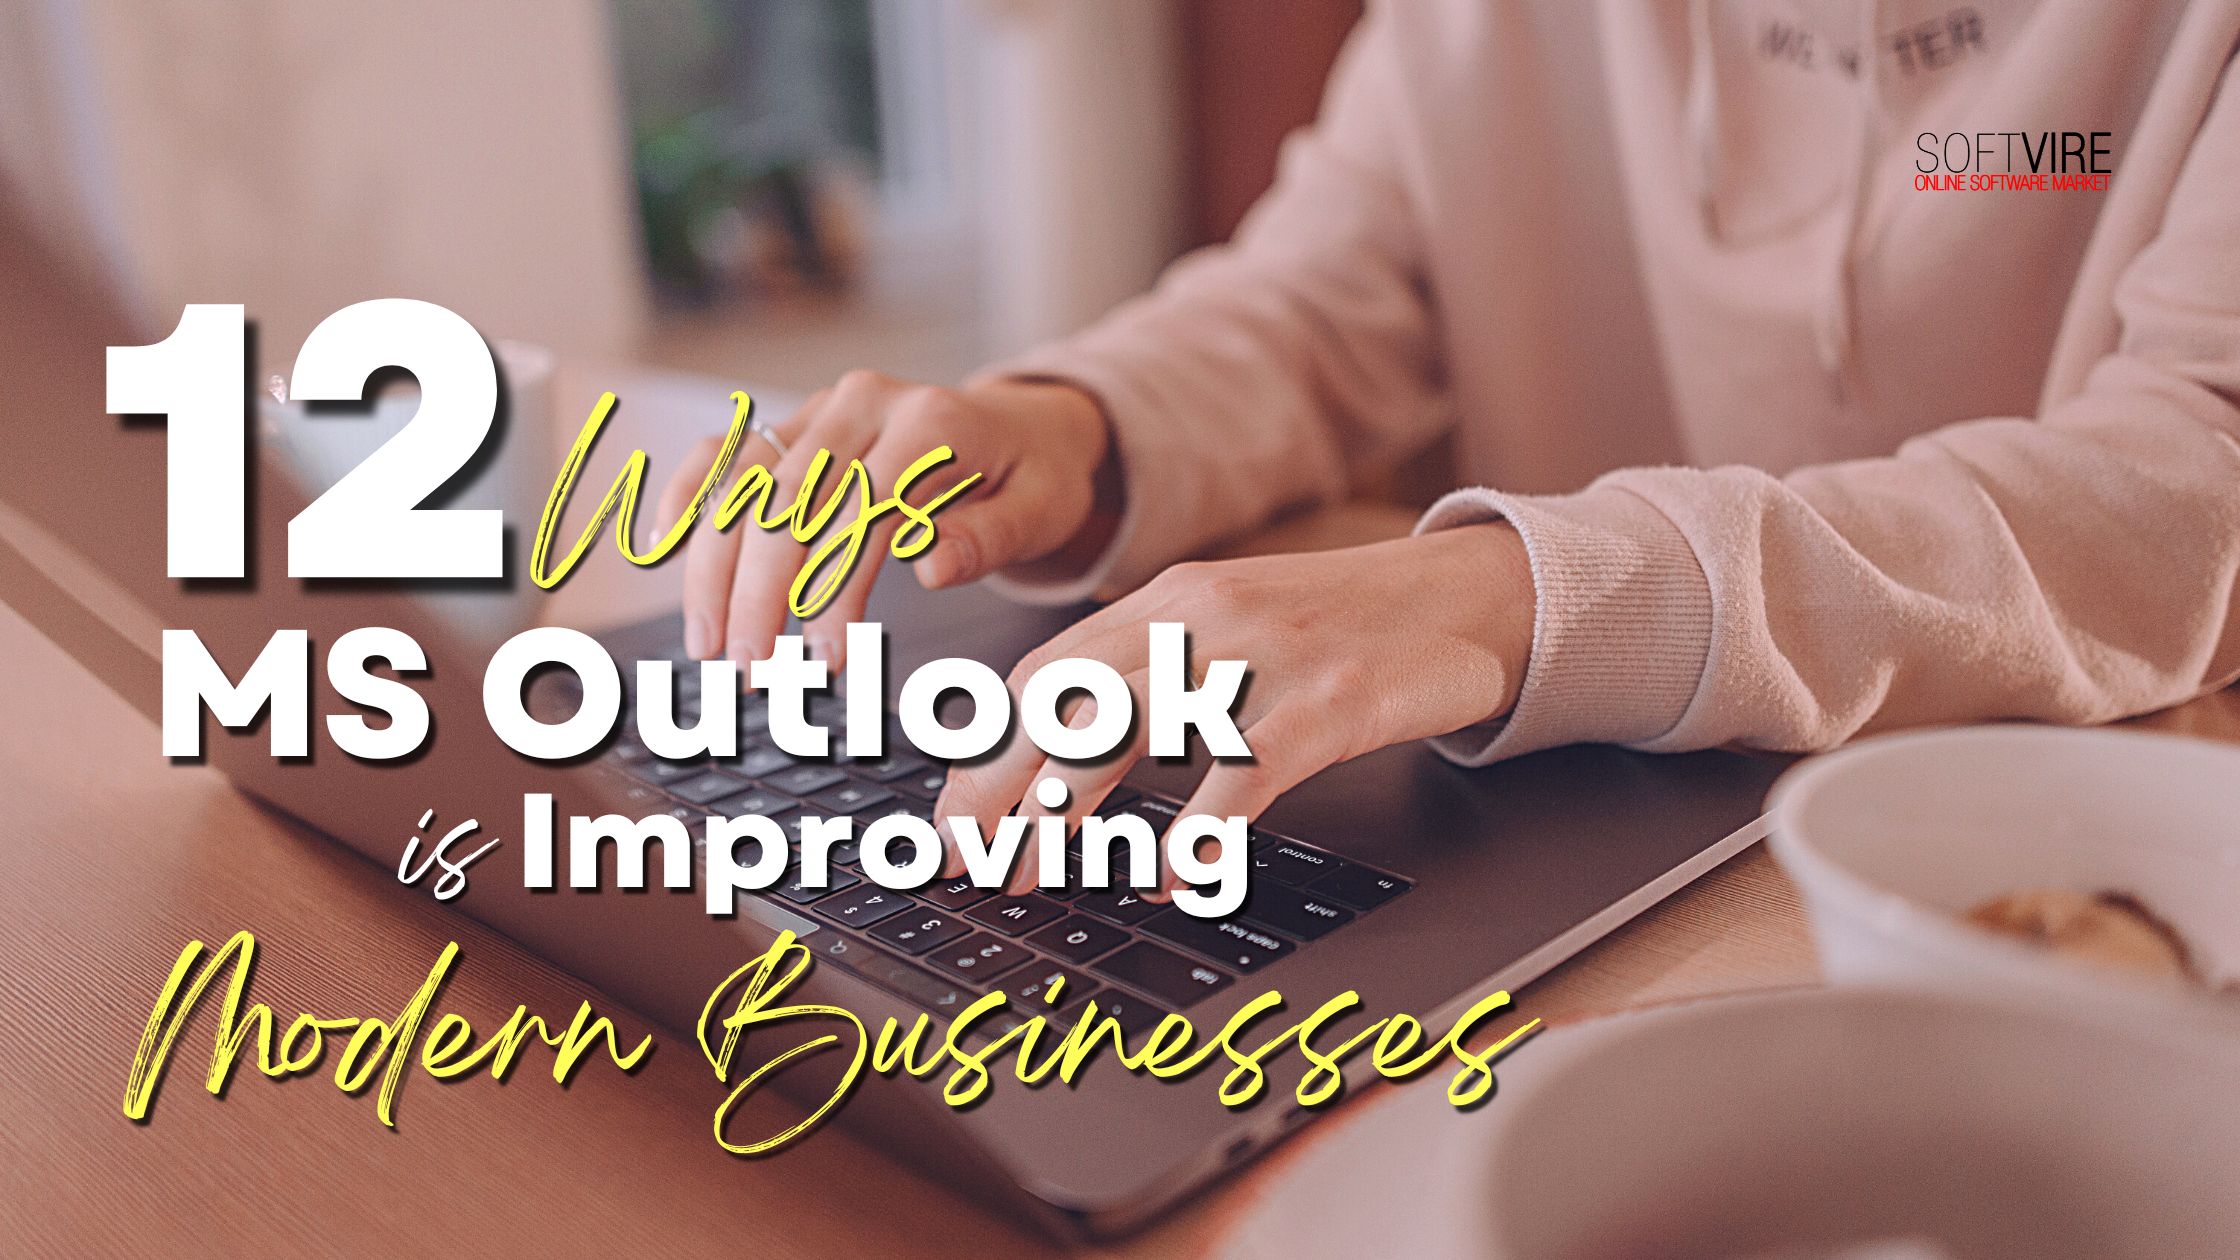 12 Ways Microsoft Outlook Boosts Modern Businesses, Softvire AU, Software Store, IT distributor, discounted software AU